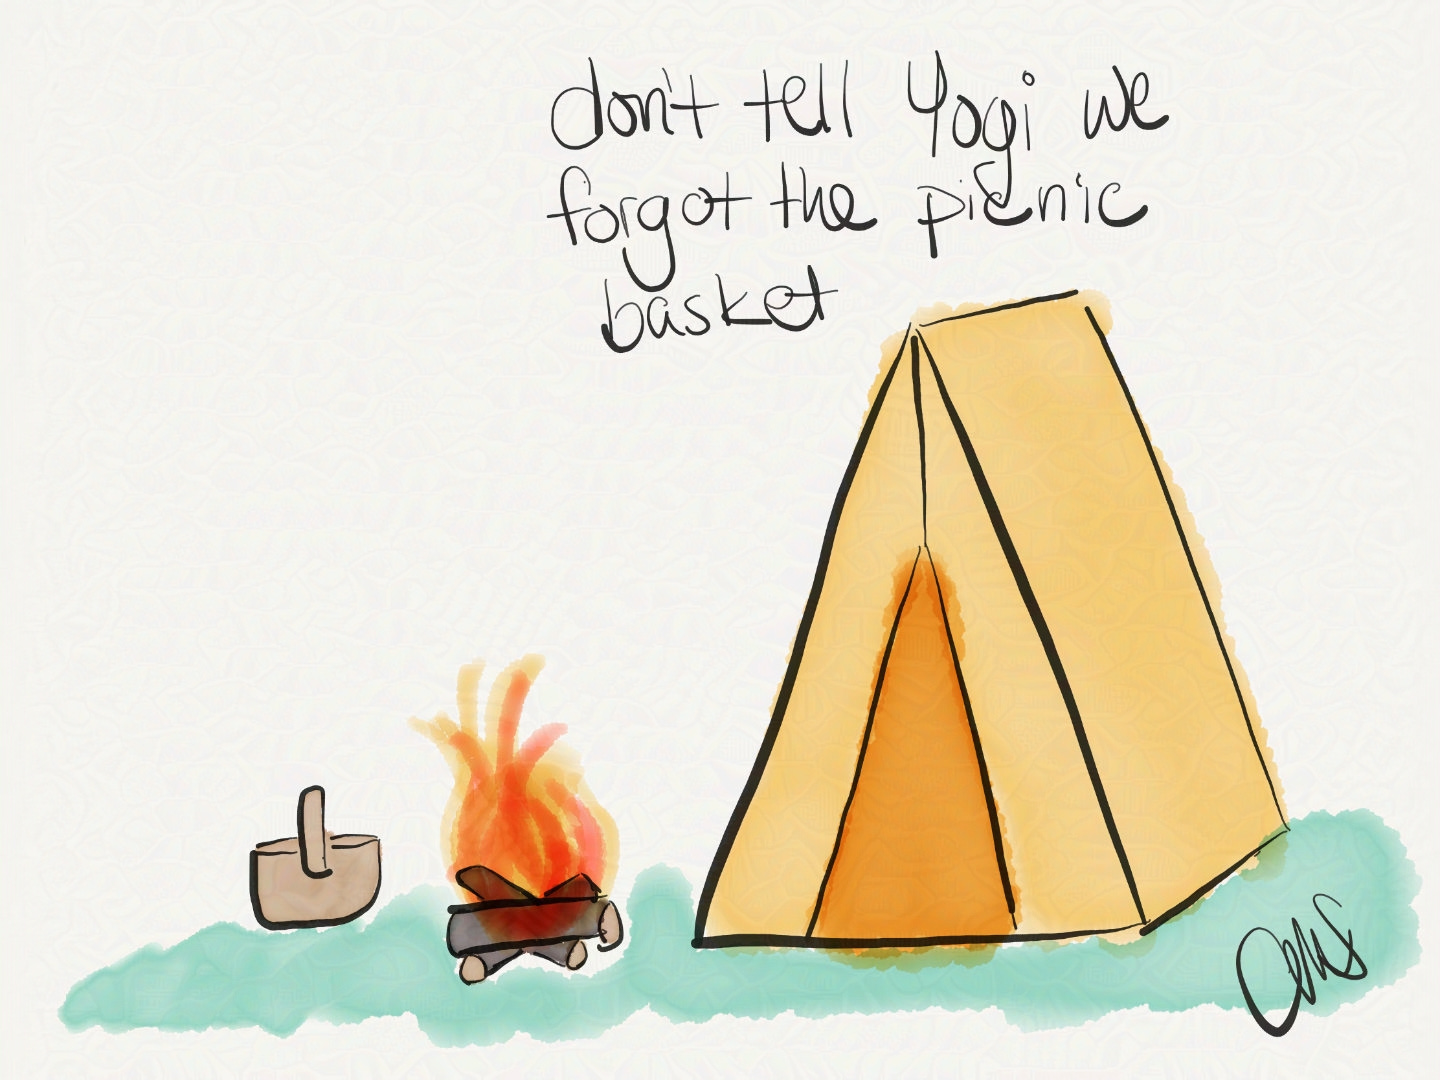 campsite with yellow tent, roaring campfire, and picnic basket. Text: "don't tell Yogi we forgot the picnic basket".